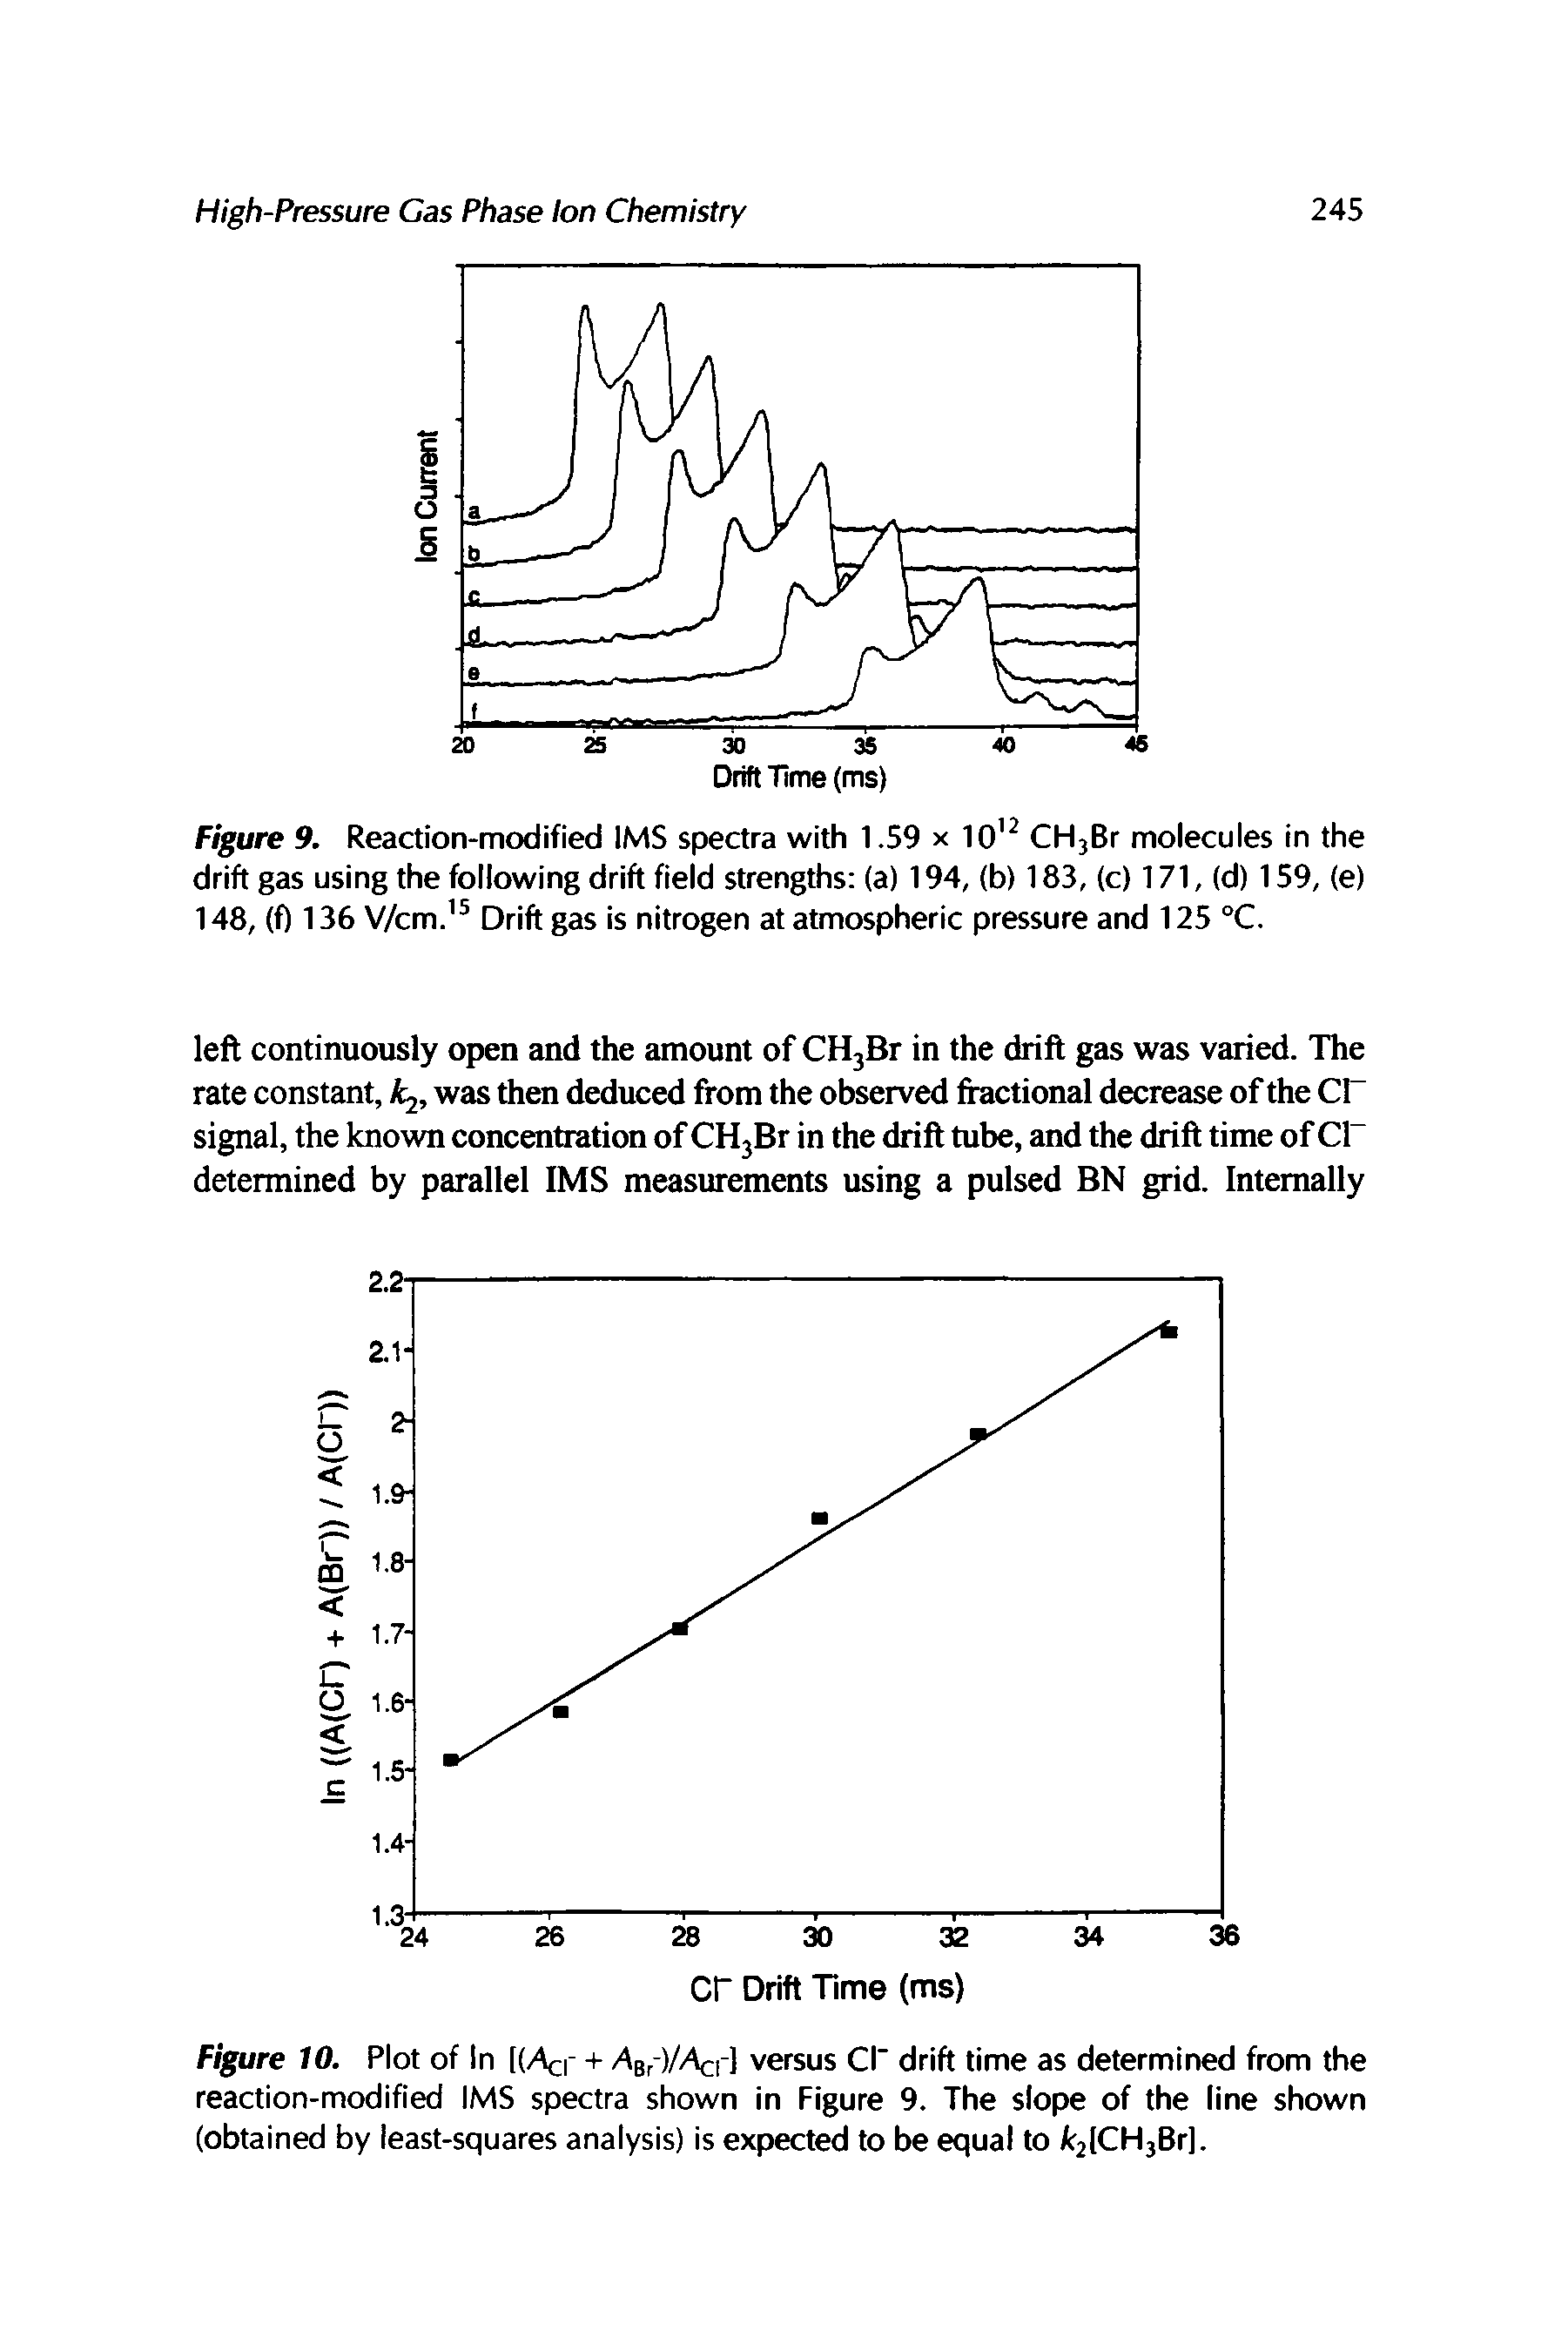 Figure 10. Plot of In [(Acr + Ab,-)/A -1 versus Cl" drift time as determined from the reaction-modified IMS spectra shown in Figure 9. The slope of the line shown (obtained by least-squares analysis) is expected to be equal to k2(CH3Br].